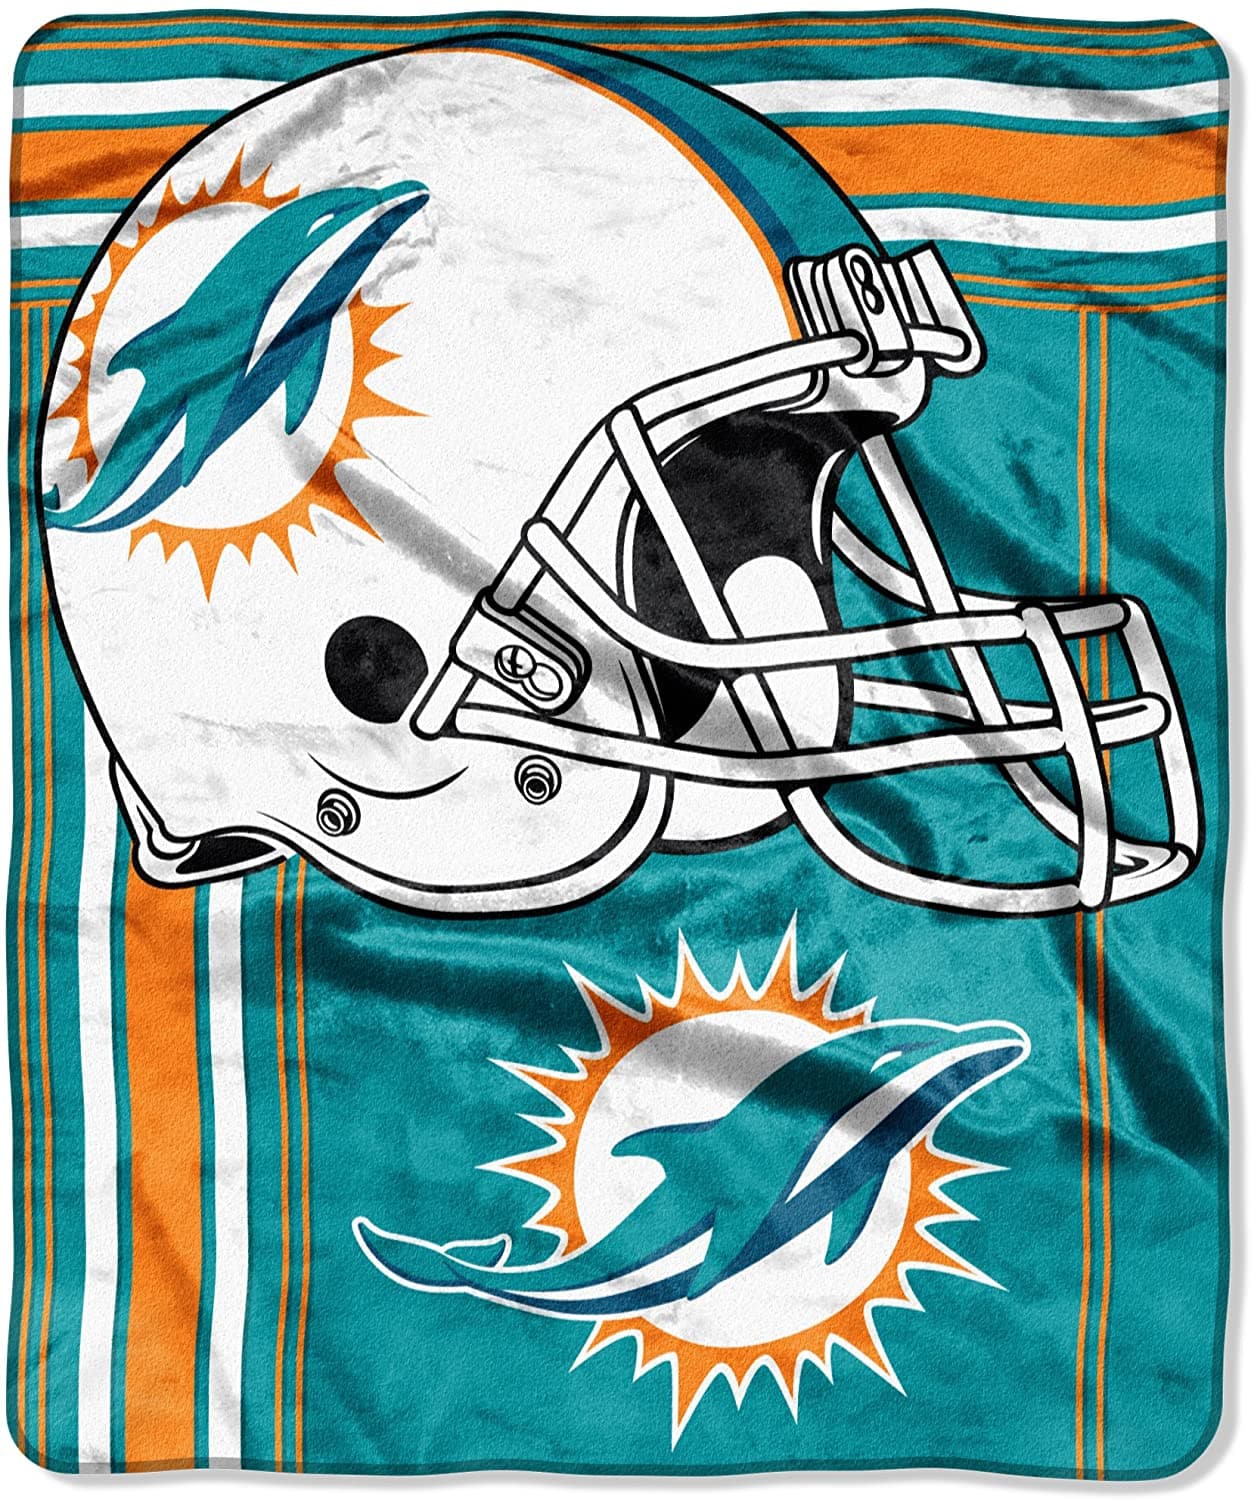 Officially Licensed Nfl Throw Miami Dolphins Fleece Blanket